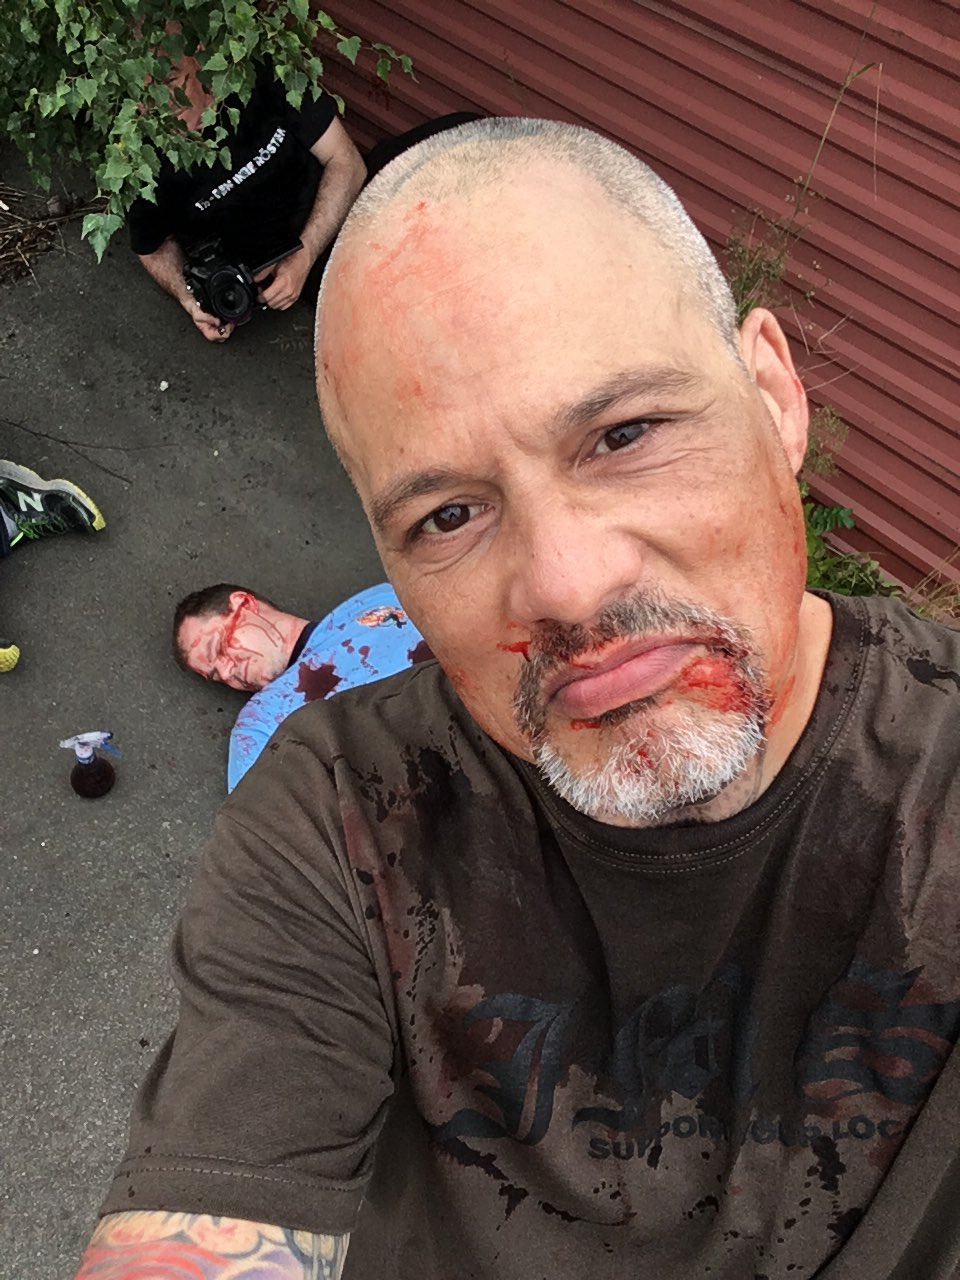 David Labrava on Twitter: "LAST DAY OF FILMING "1% THE VOICE WITHIN" IN